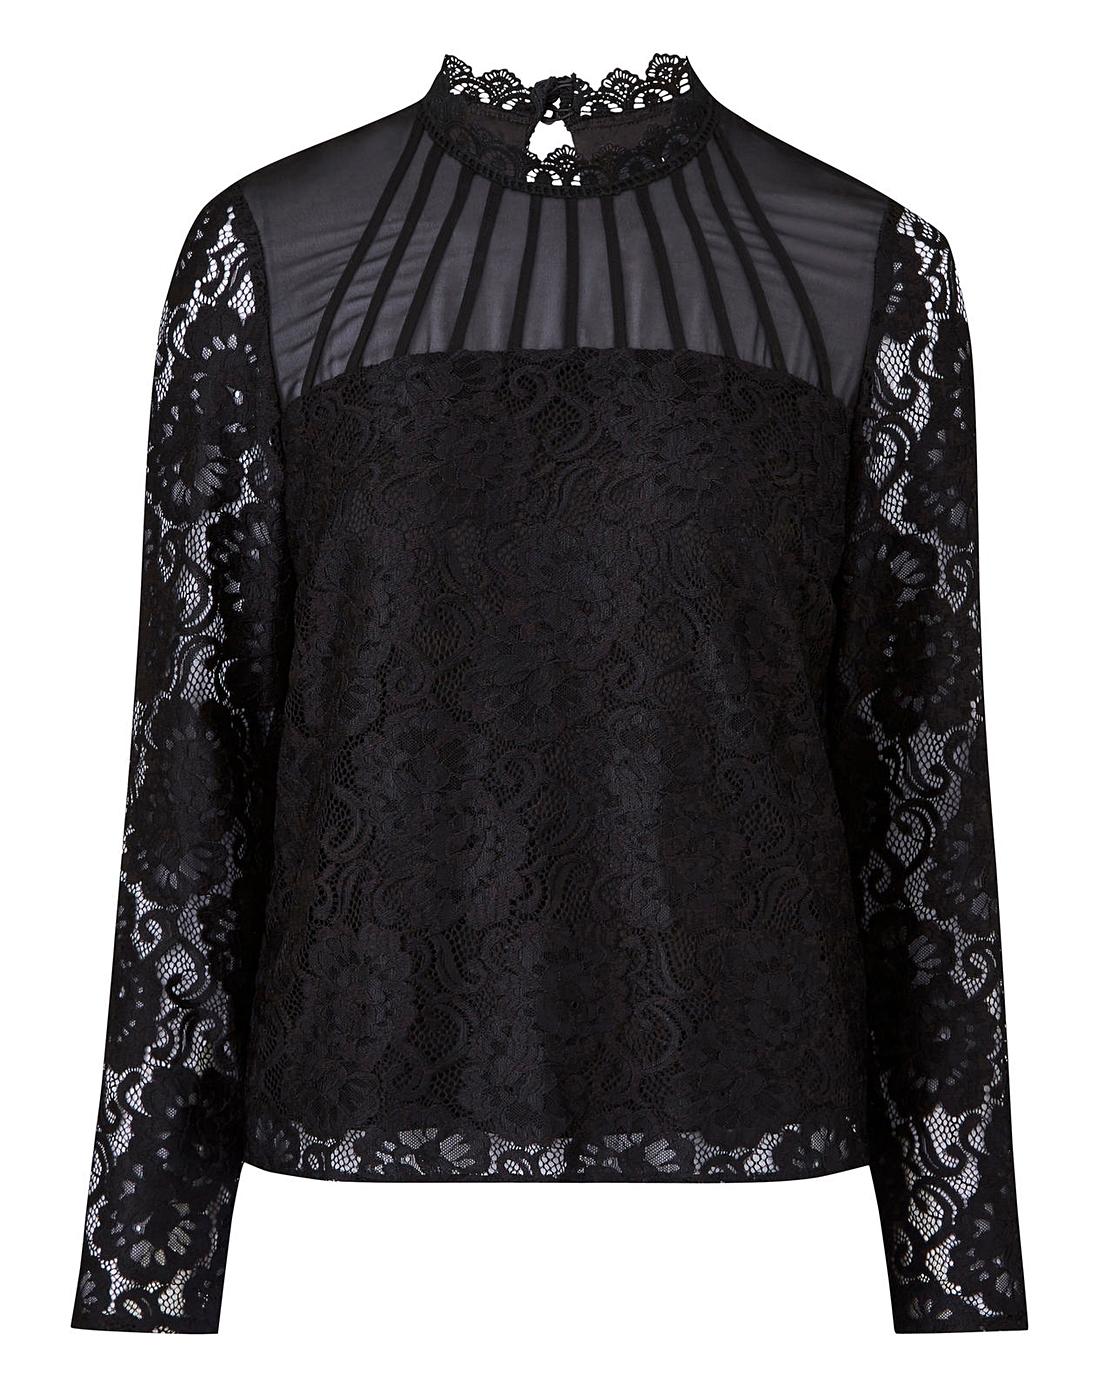 Joanna Hope Lace Top | Crazy Clearance